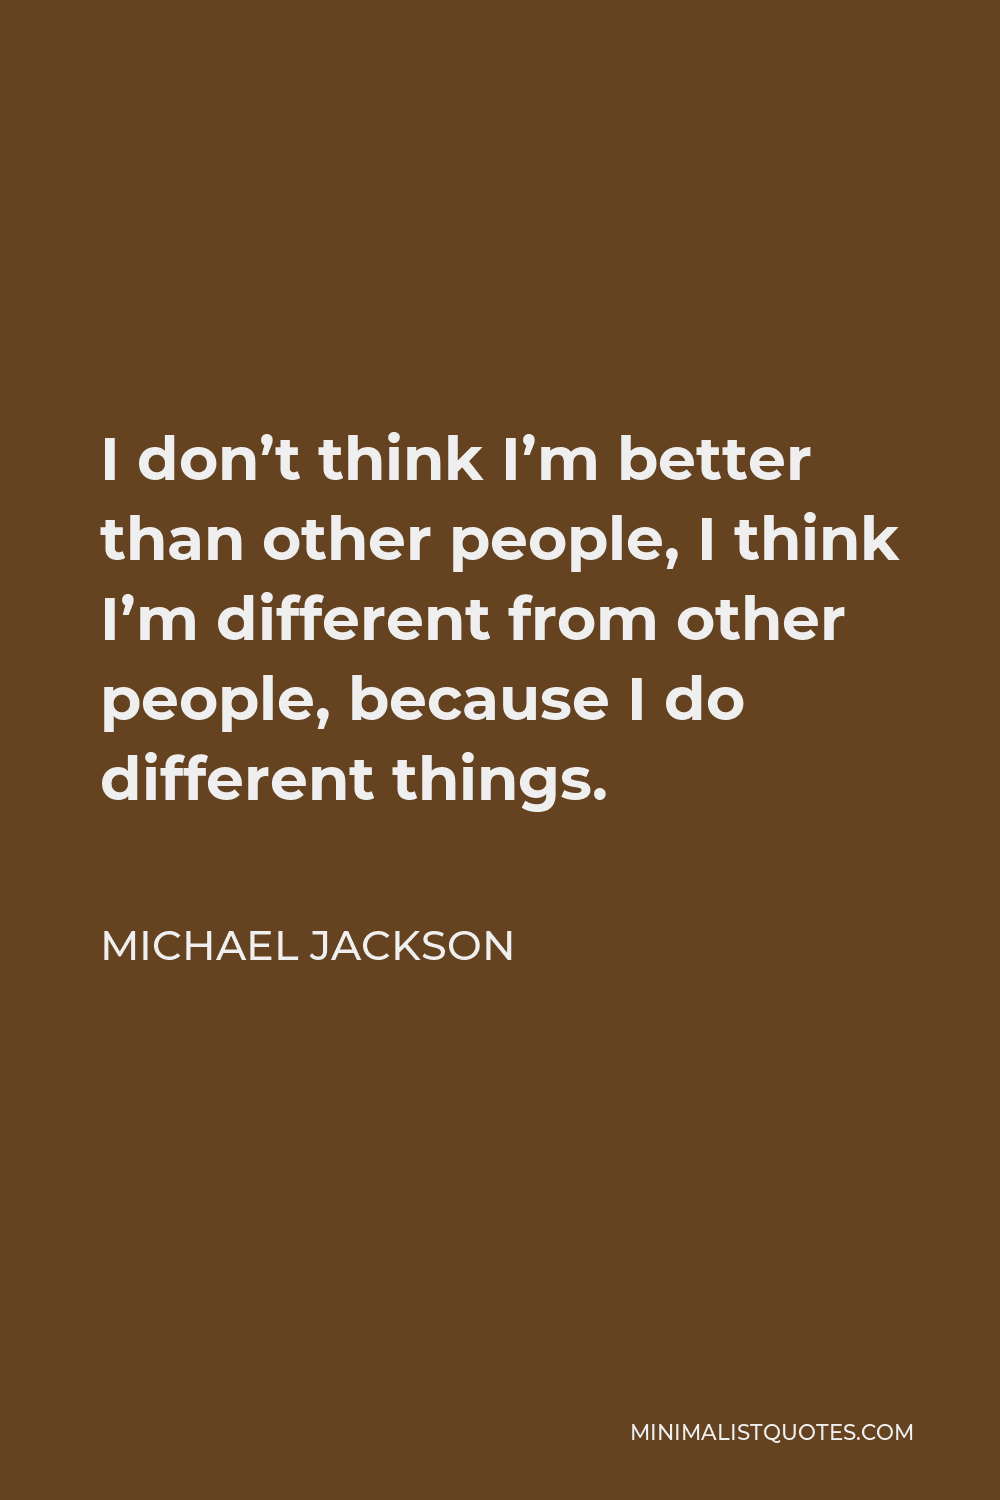 Michael Jackson Quote - I don’t think I’m better than other people, I think I’m different from other people, because I do different things.